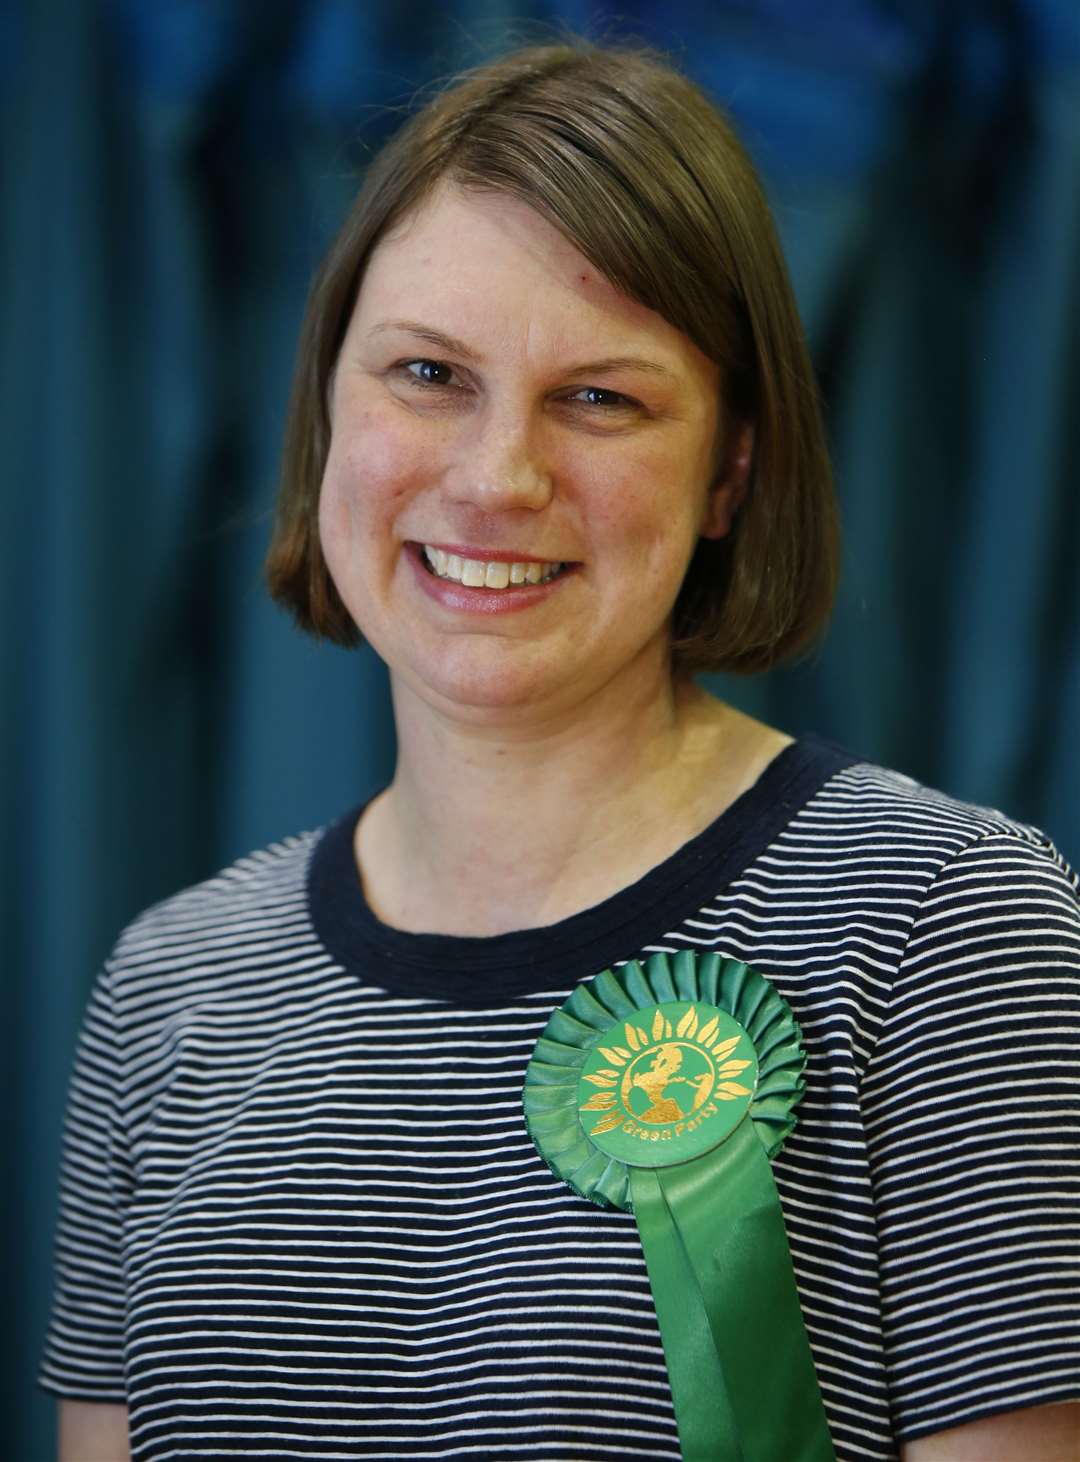 Cllr April Clark was in hospital alone on the day of the alleged party. Picture: Andy Jones